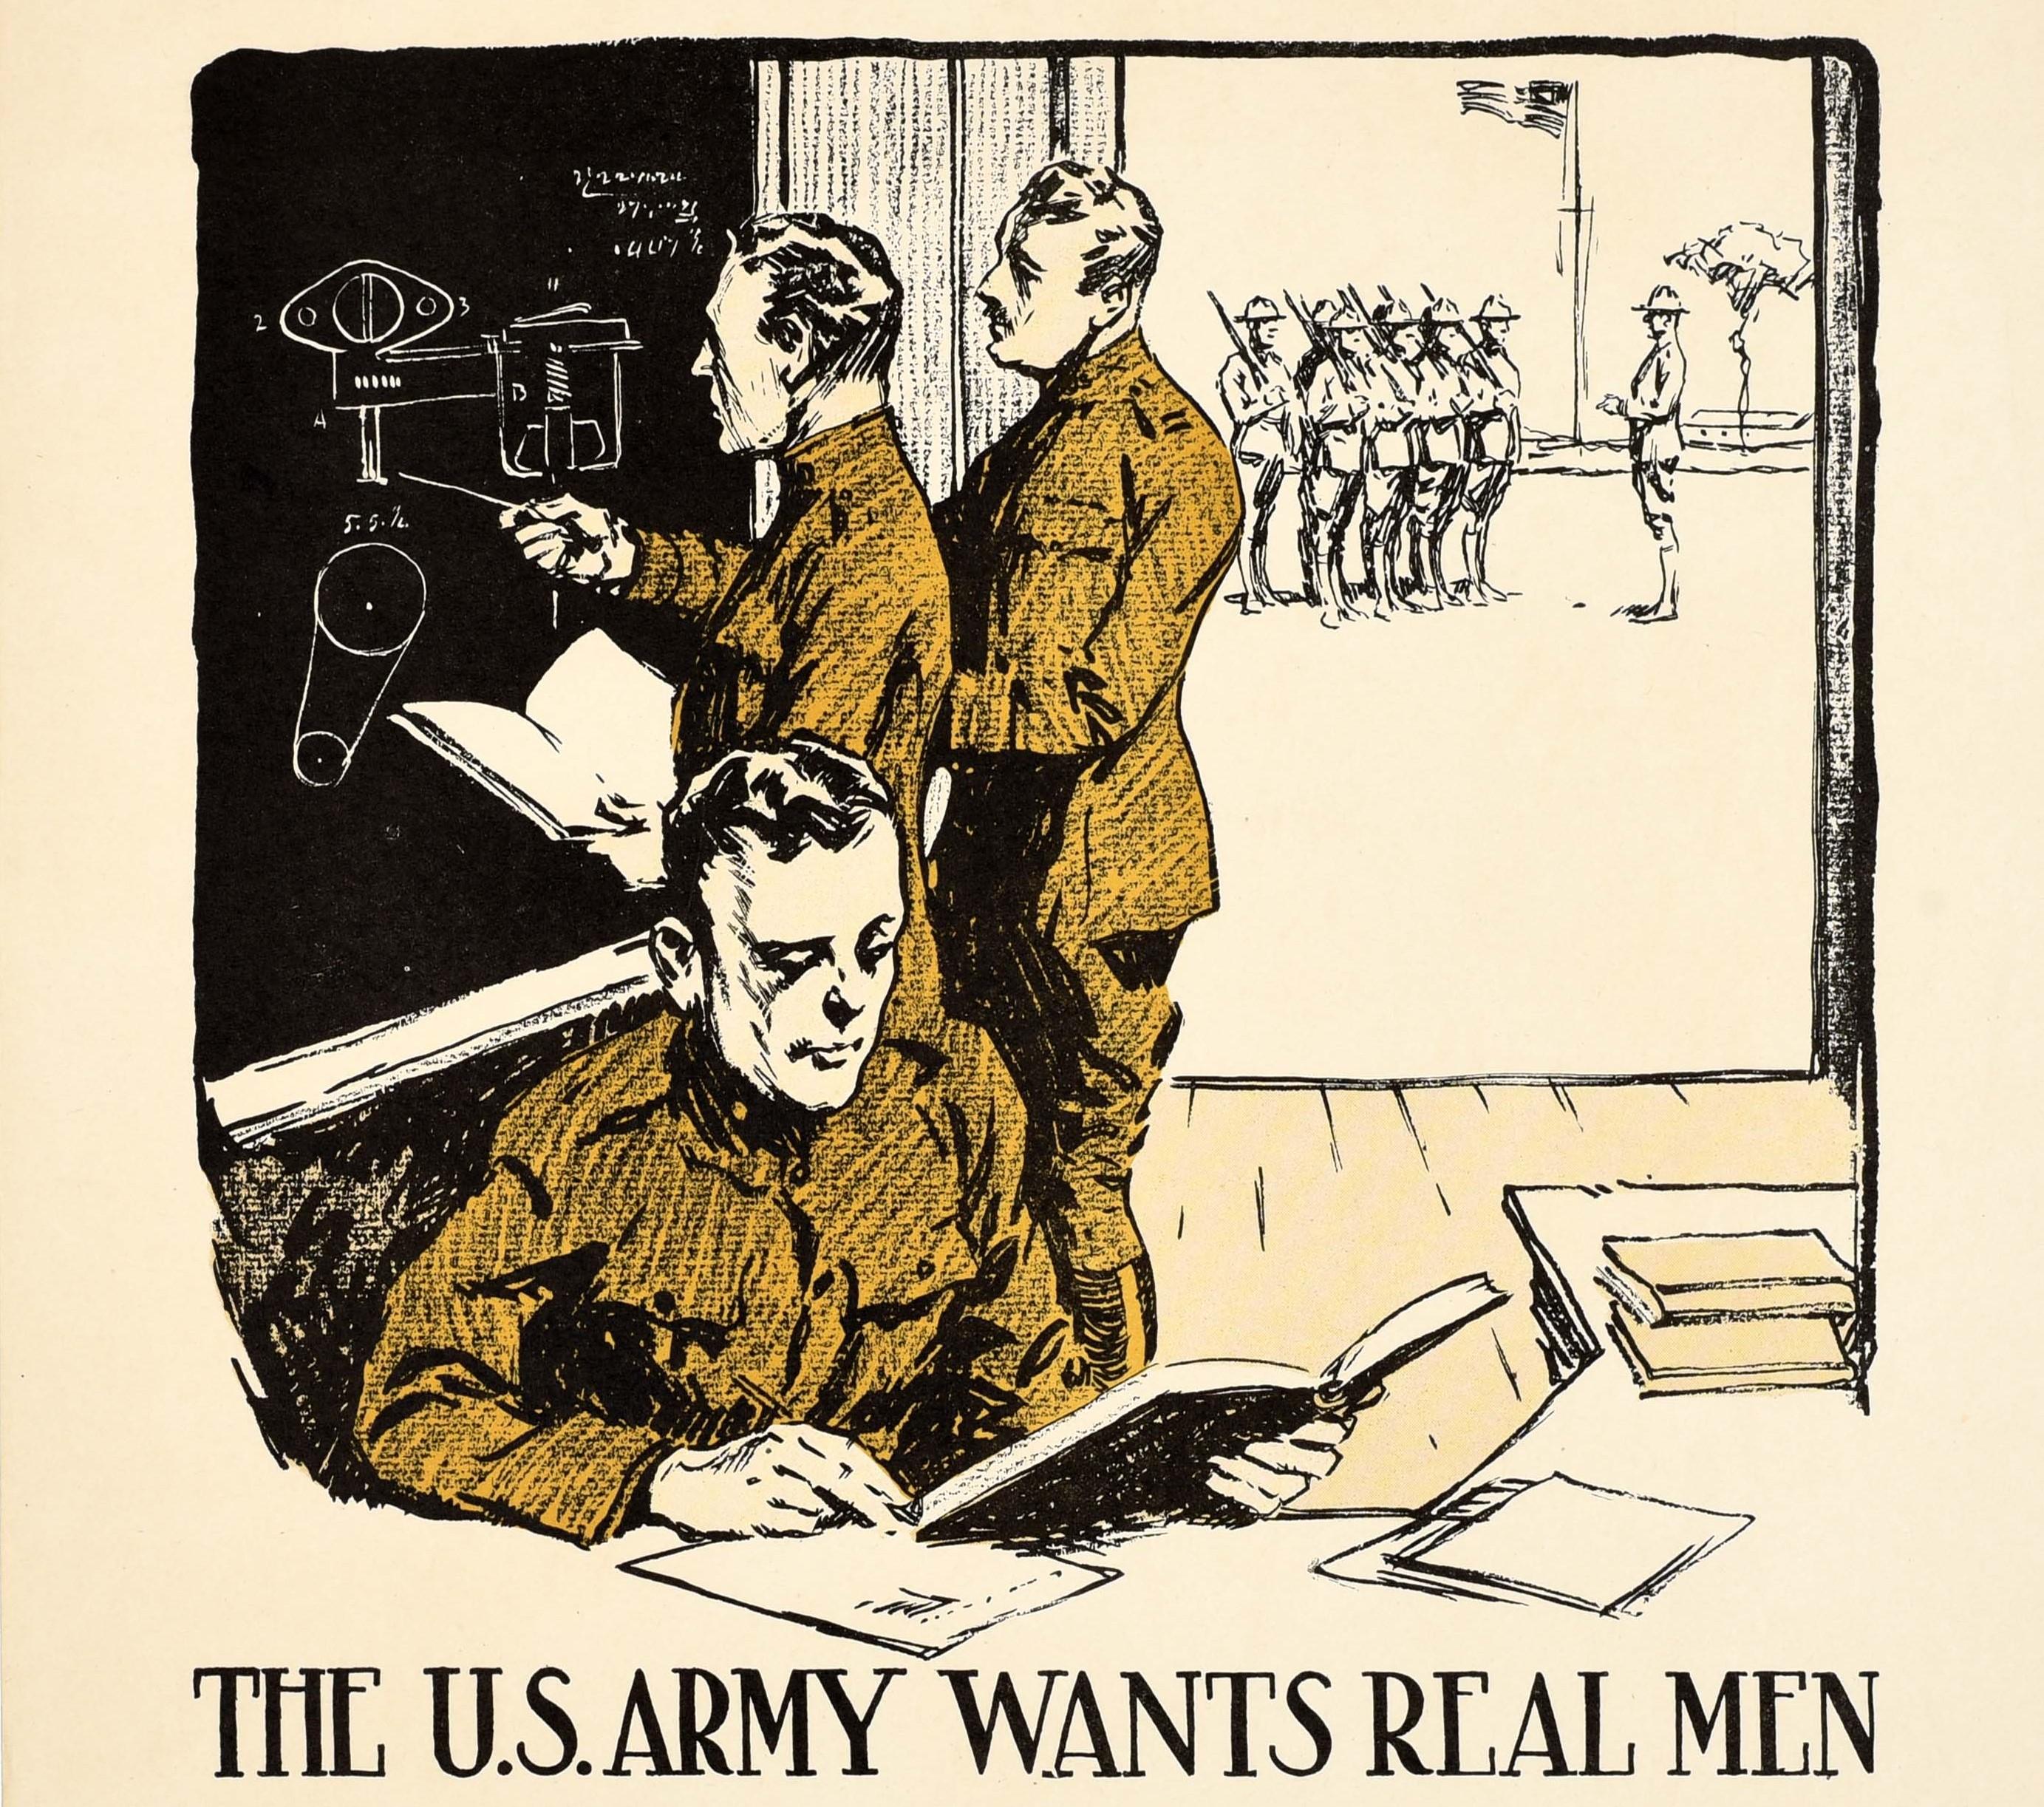 Original antikes Rekrutierungsplakat aus dem Ersten Weltkrieg - The U.S. Army wants real men Join the University in Khaki and fit yourself for higher rank in civil life or a commission in the army You earn while you learn - mit einem großartigen